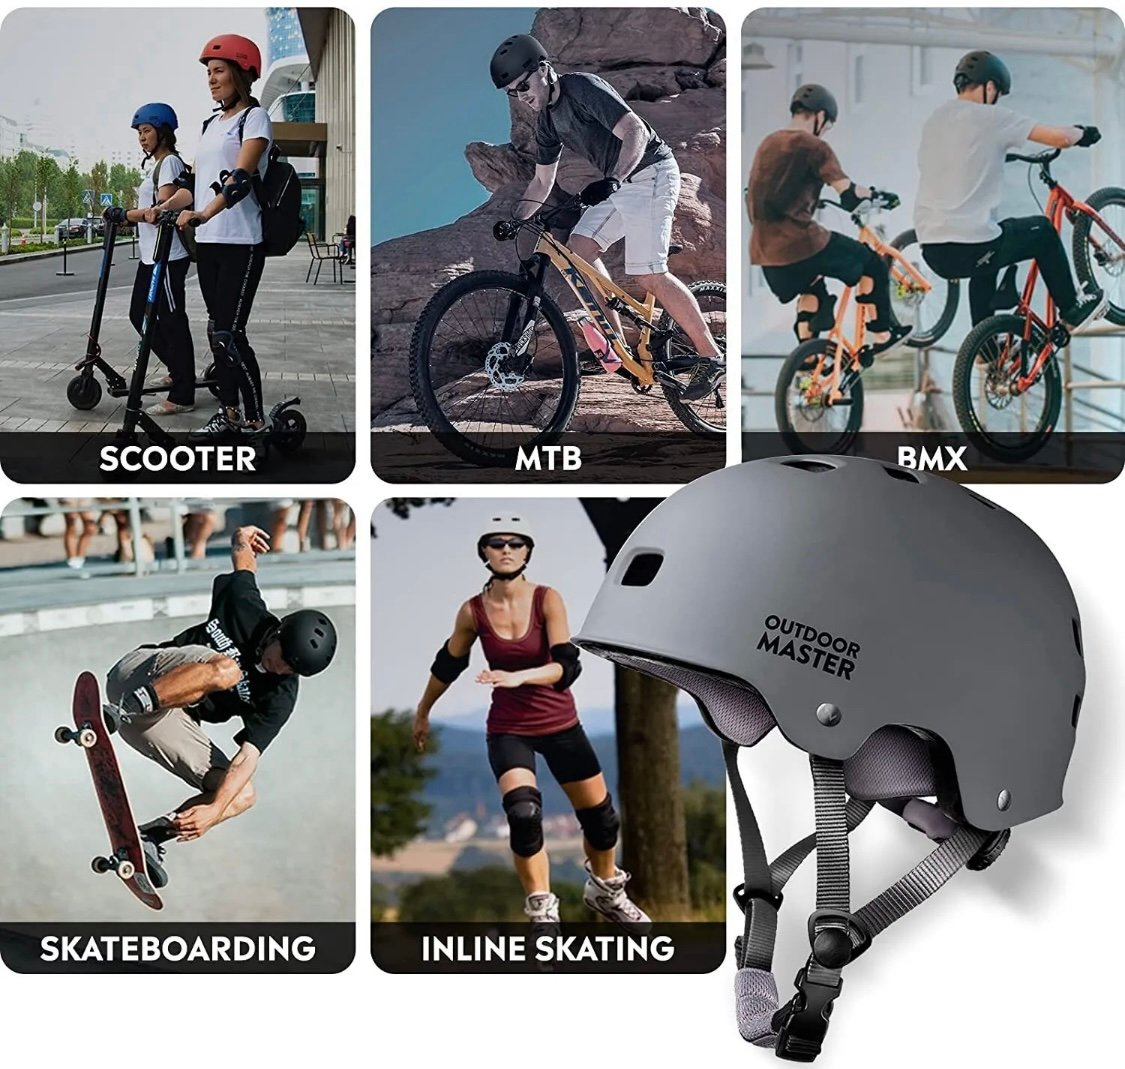 Skateboard Cycling Helmet - Two Removable Liners Ventilation Multi-Sport Scooter g0LafFu1P